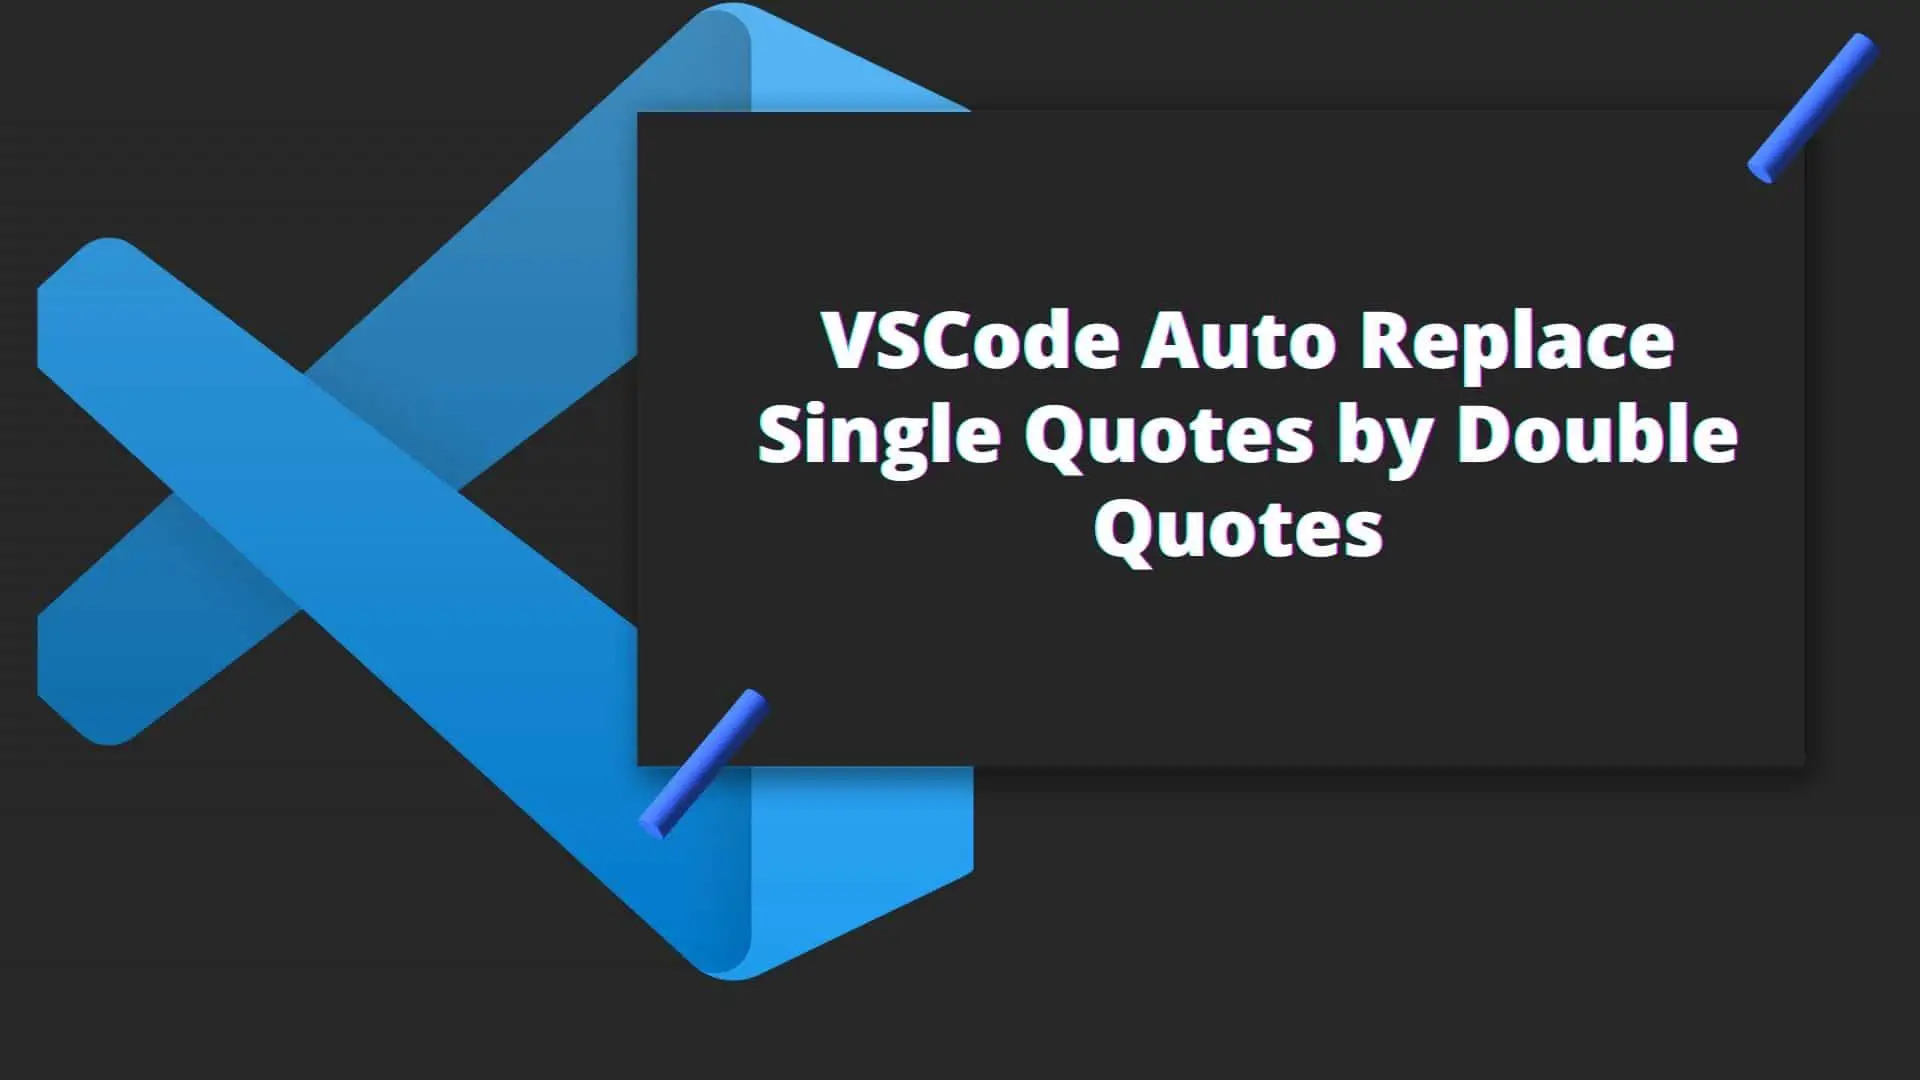 vscode-auto-replace-single-quotes-with-double-quotes-solved